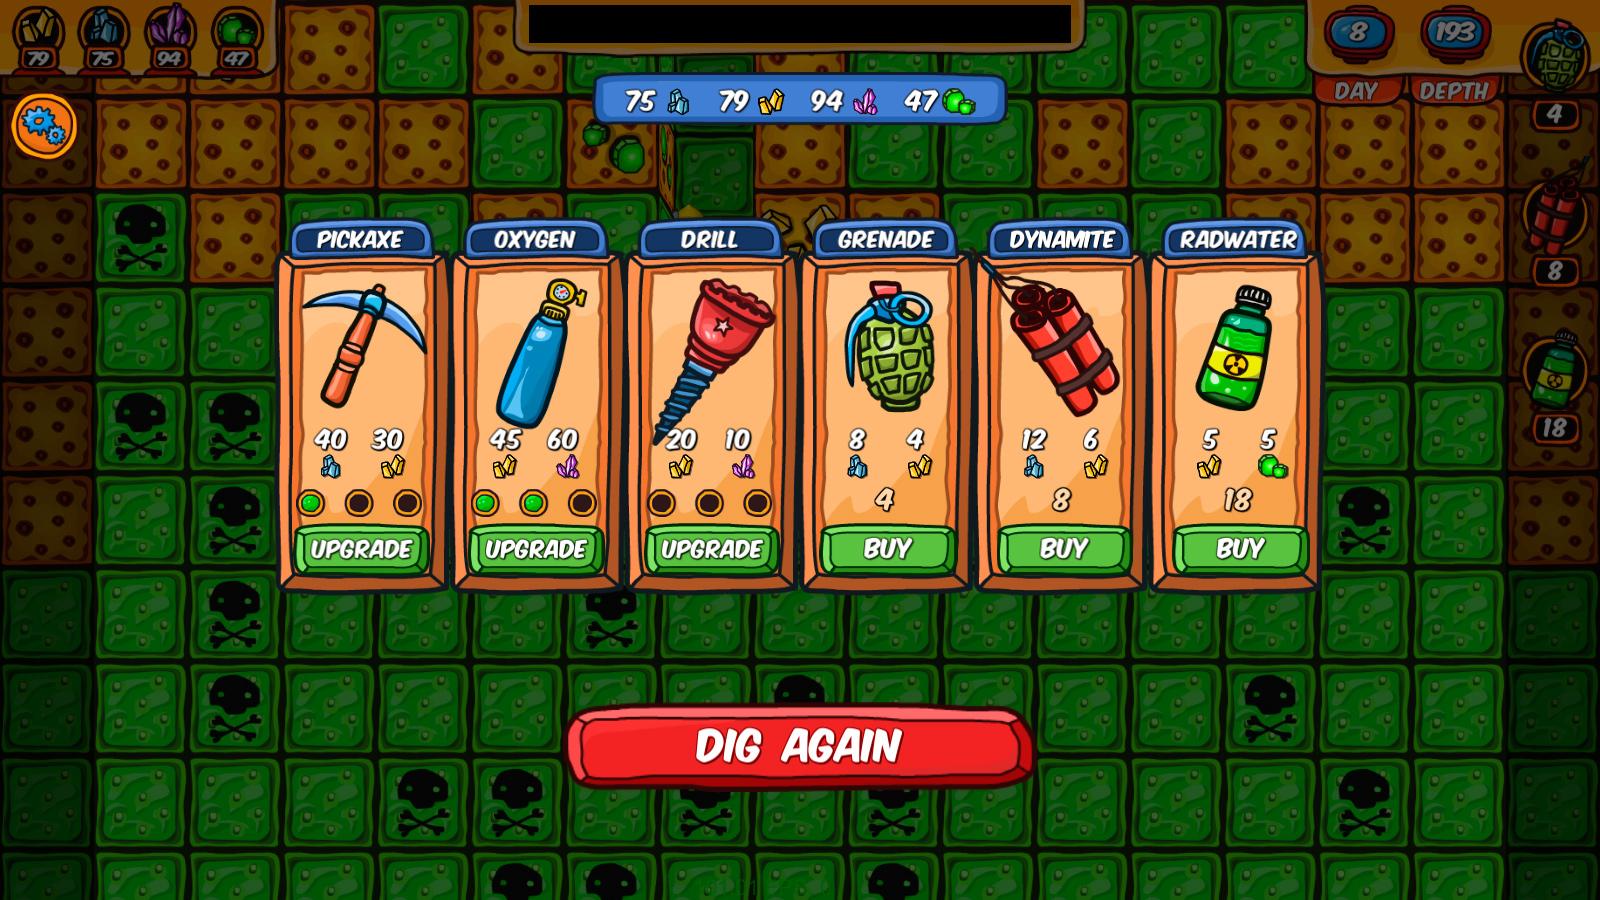 Screenshot №5 from game Mad Digger